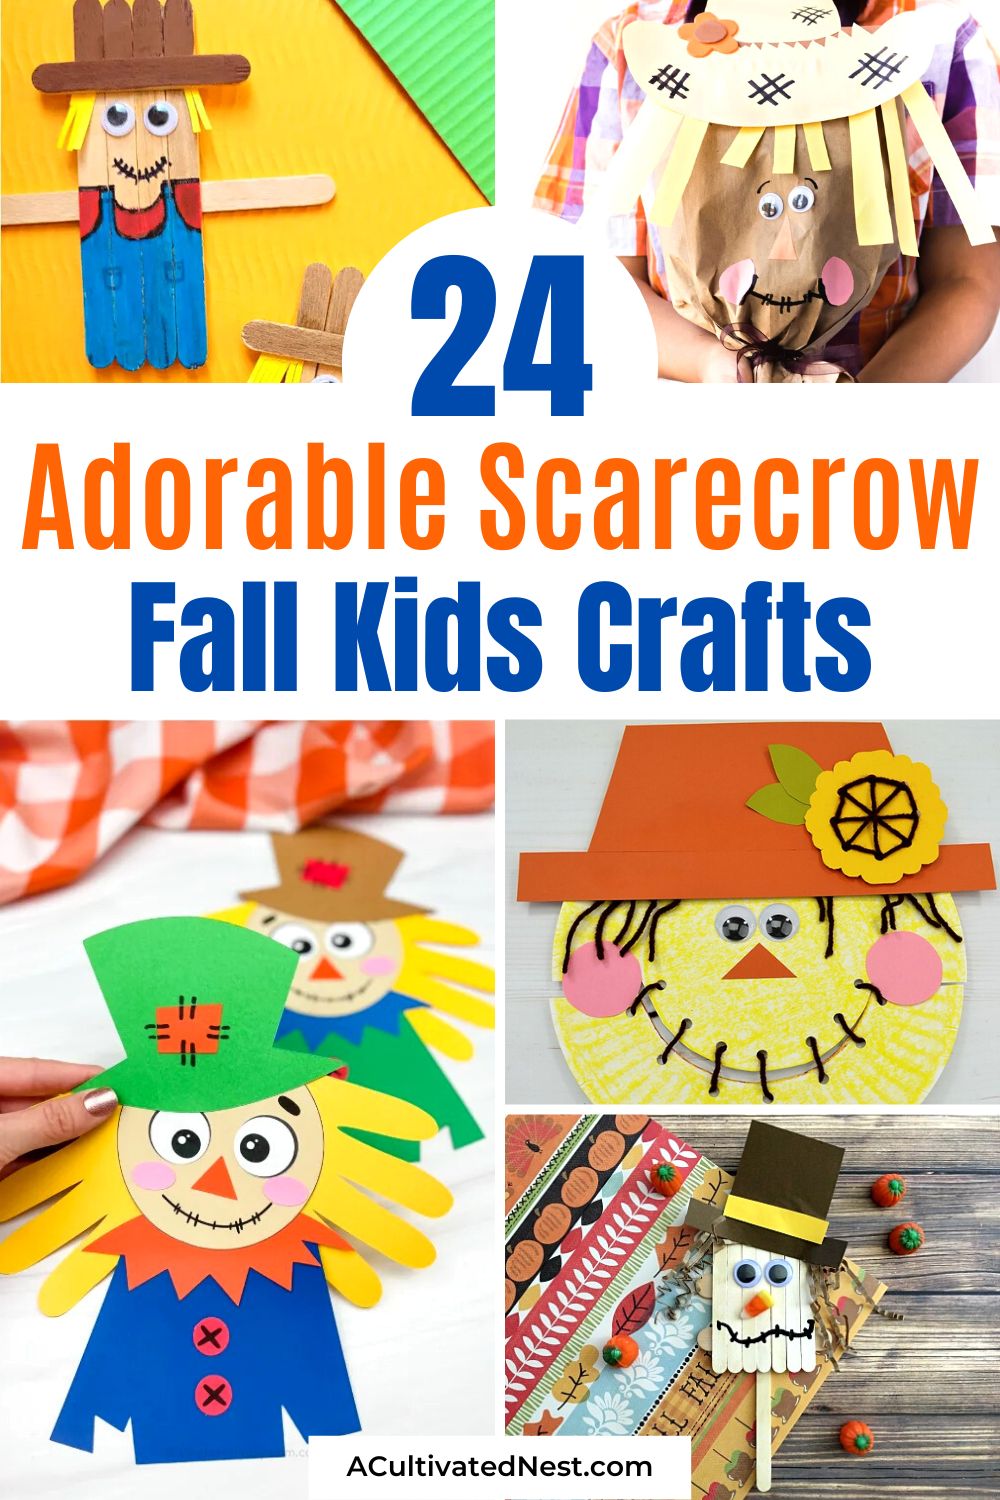 24 Adorable Fall Scarecrow Crafts for Kids- Looking for fun and creative ways to celebrate fall with your kids? Dive into these charming scarecrow crafts designed just for little hands. Embrace the spirit of autumn with these delightful DIY projects! | #FallActivities #ScarecrowCrafts #CraftsForKids #kidsCrafts #ACultivatedNest